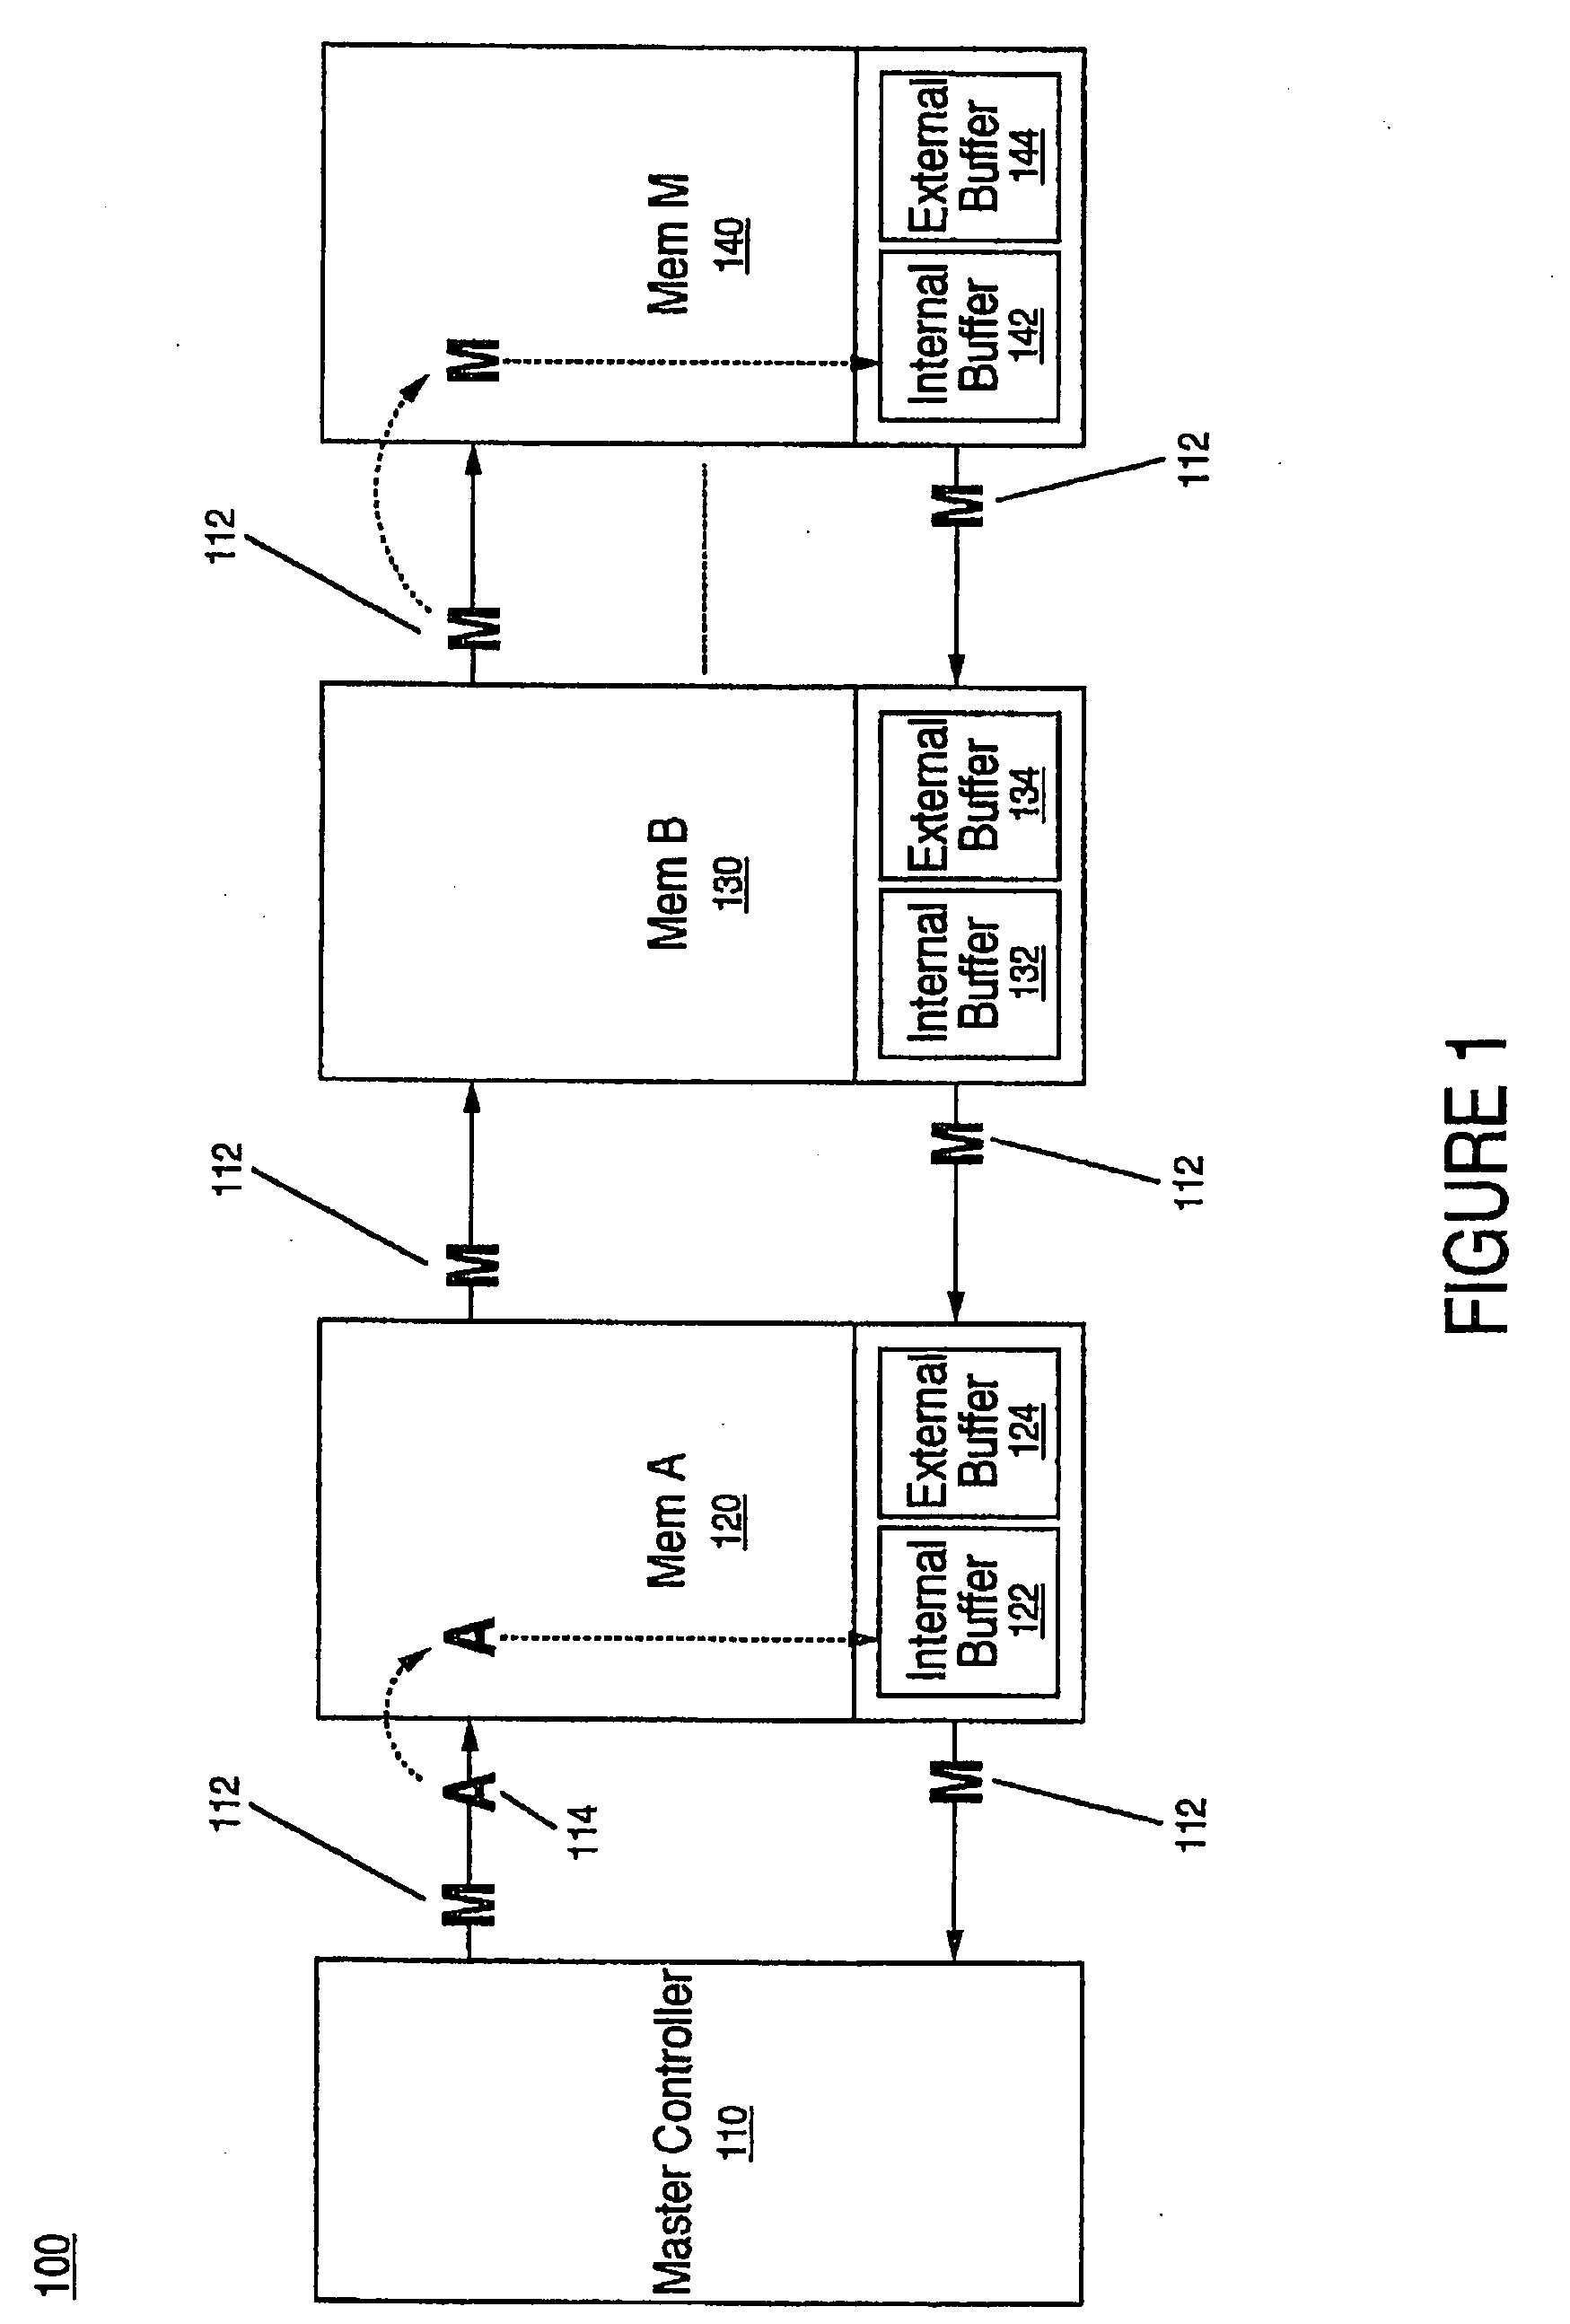 Method for setting parameters and determining latency in a chained device system